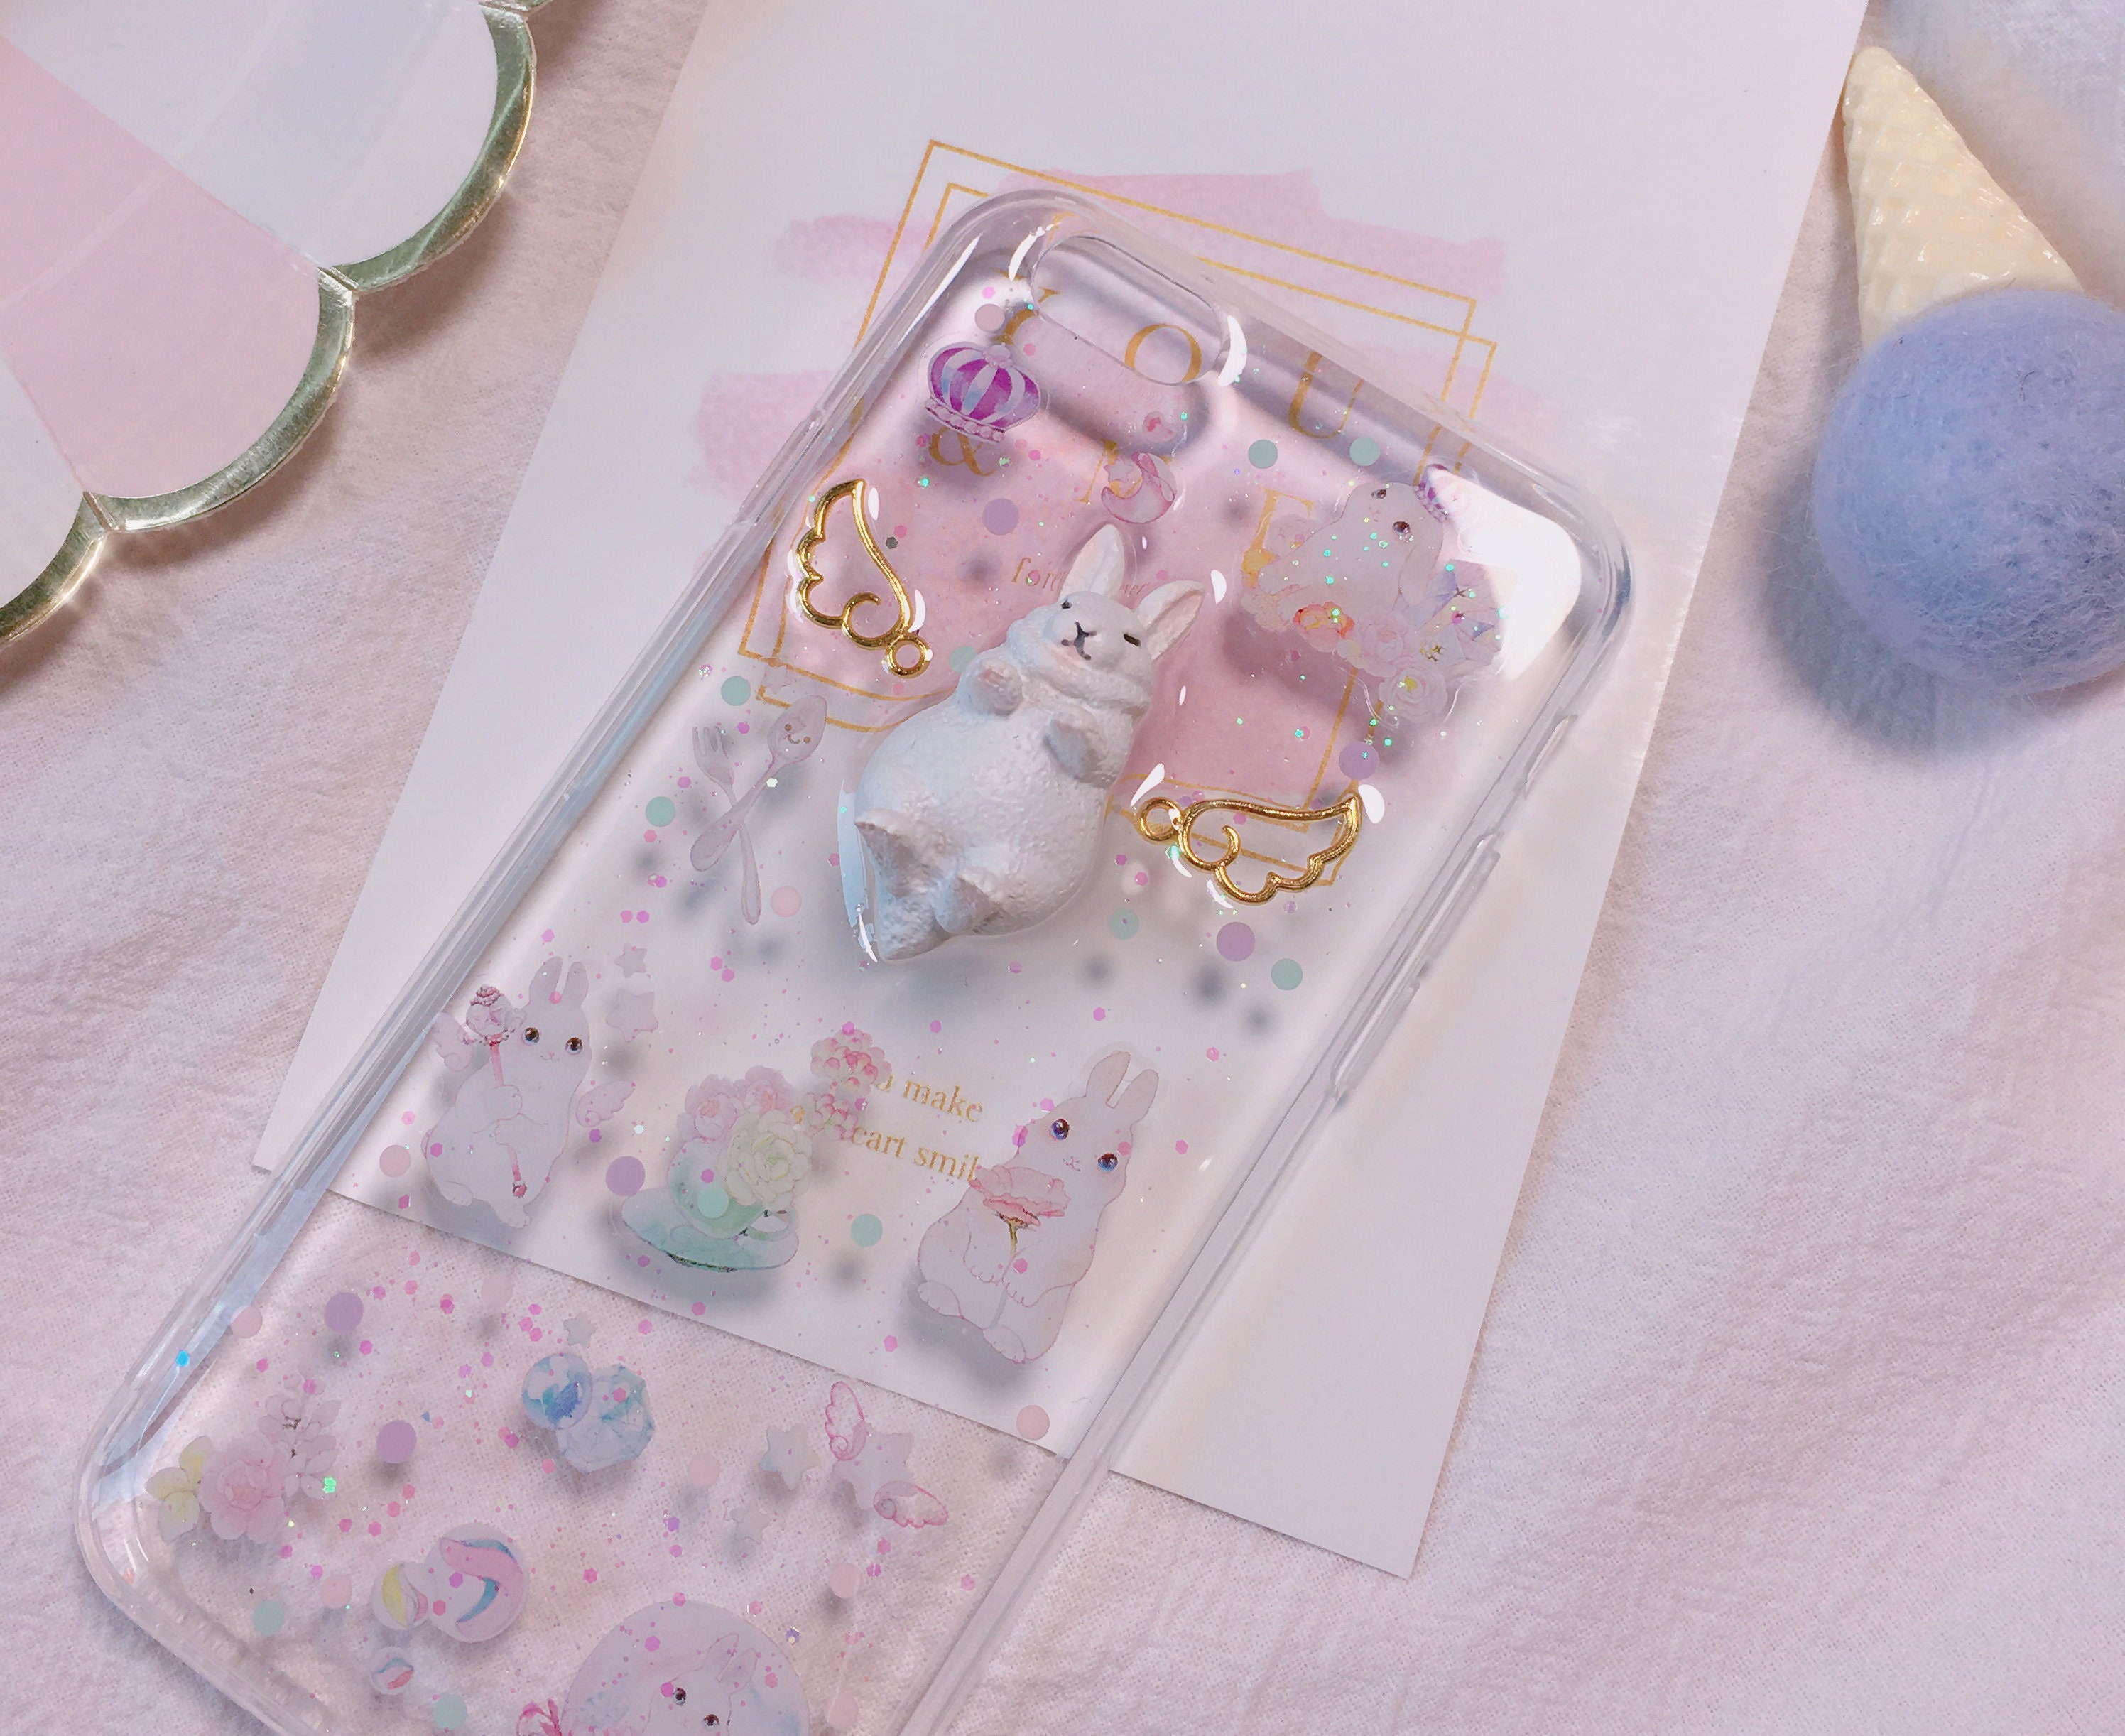 Kawaii 3D Angel Bunny/wings/resin-poured/glitter Flakes - Etsy